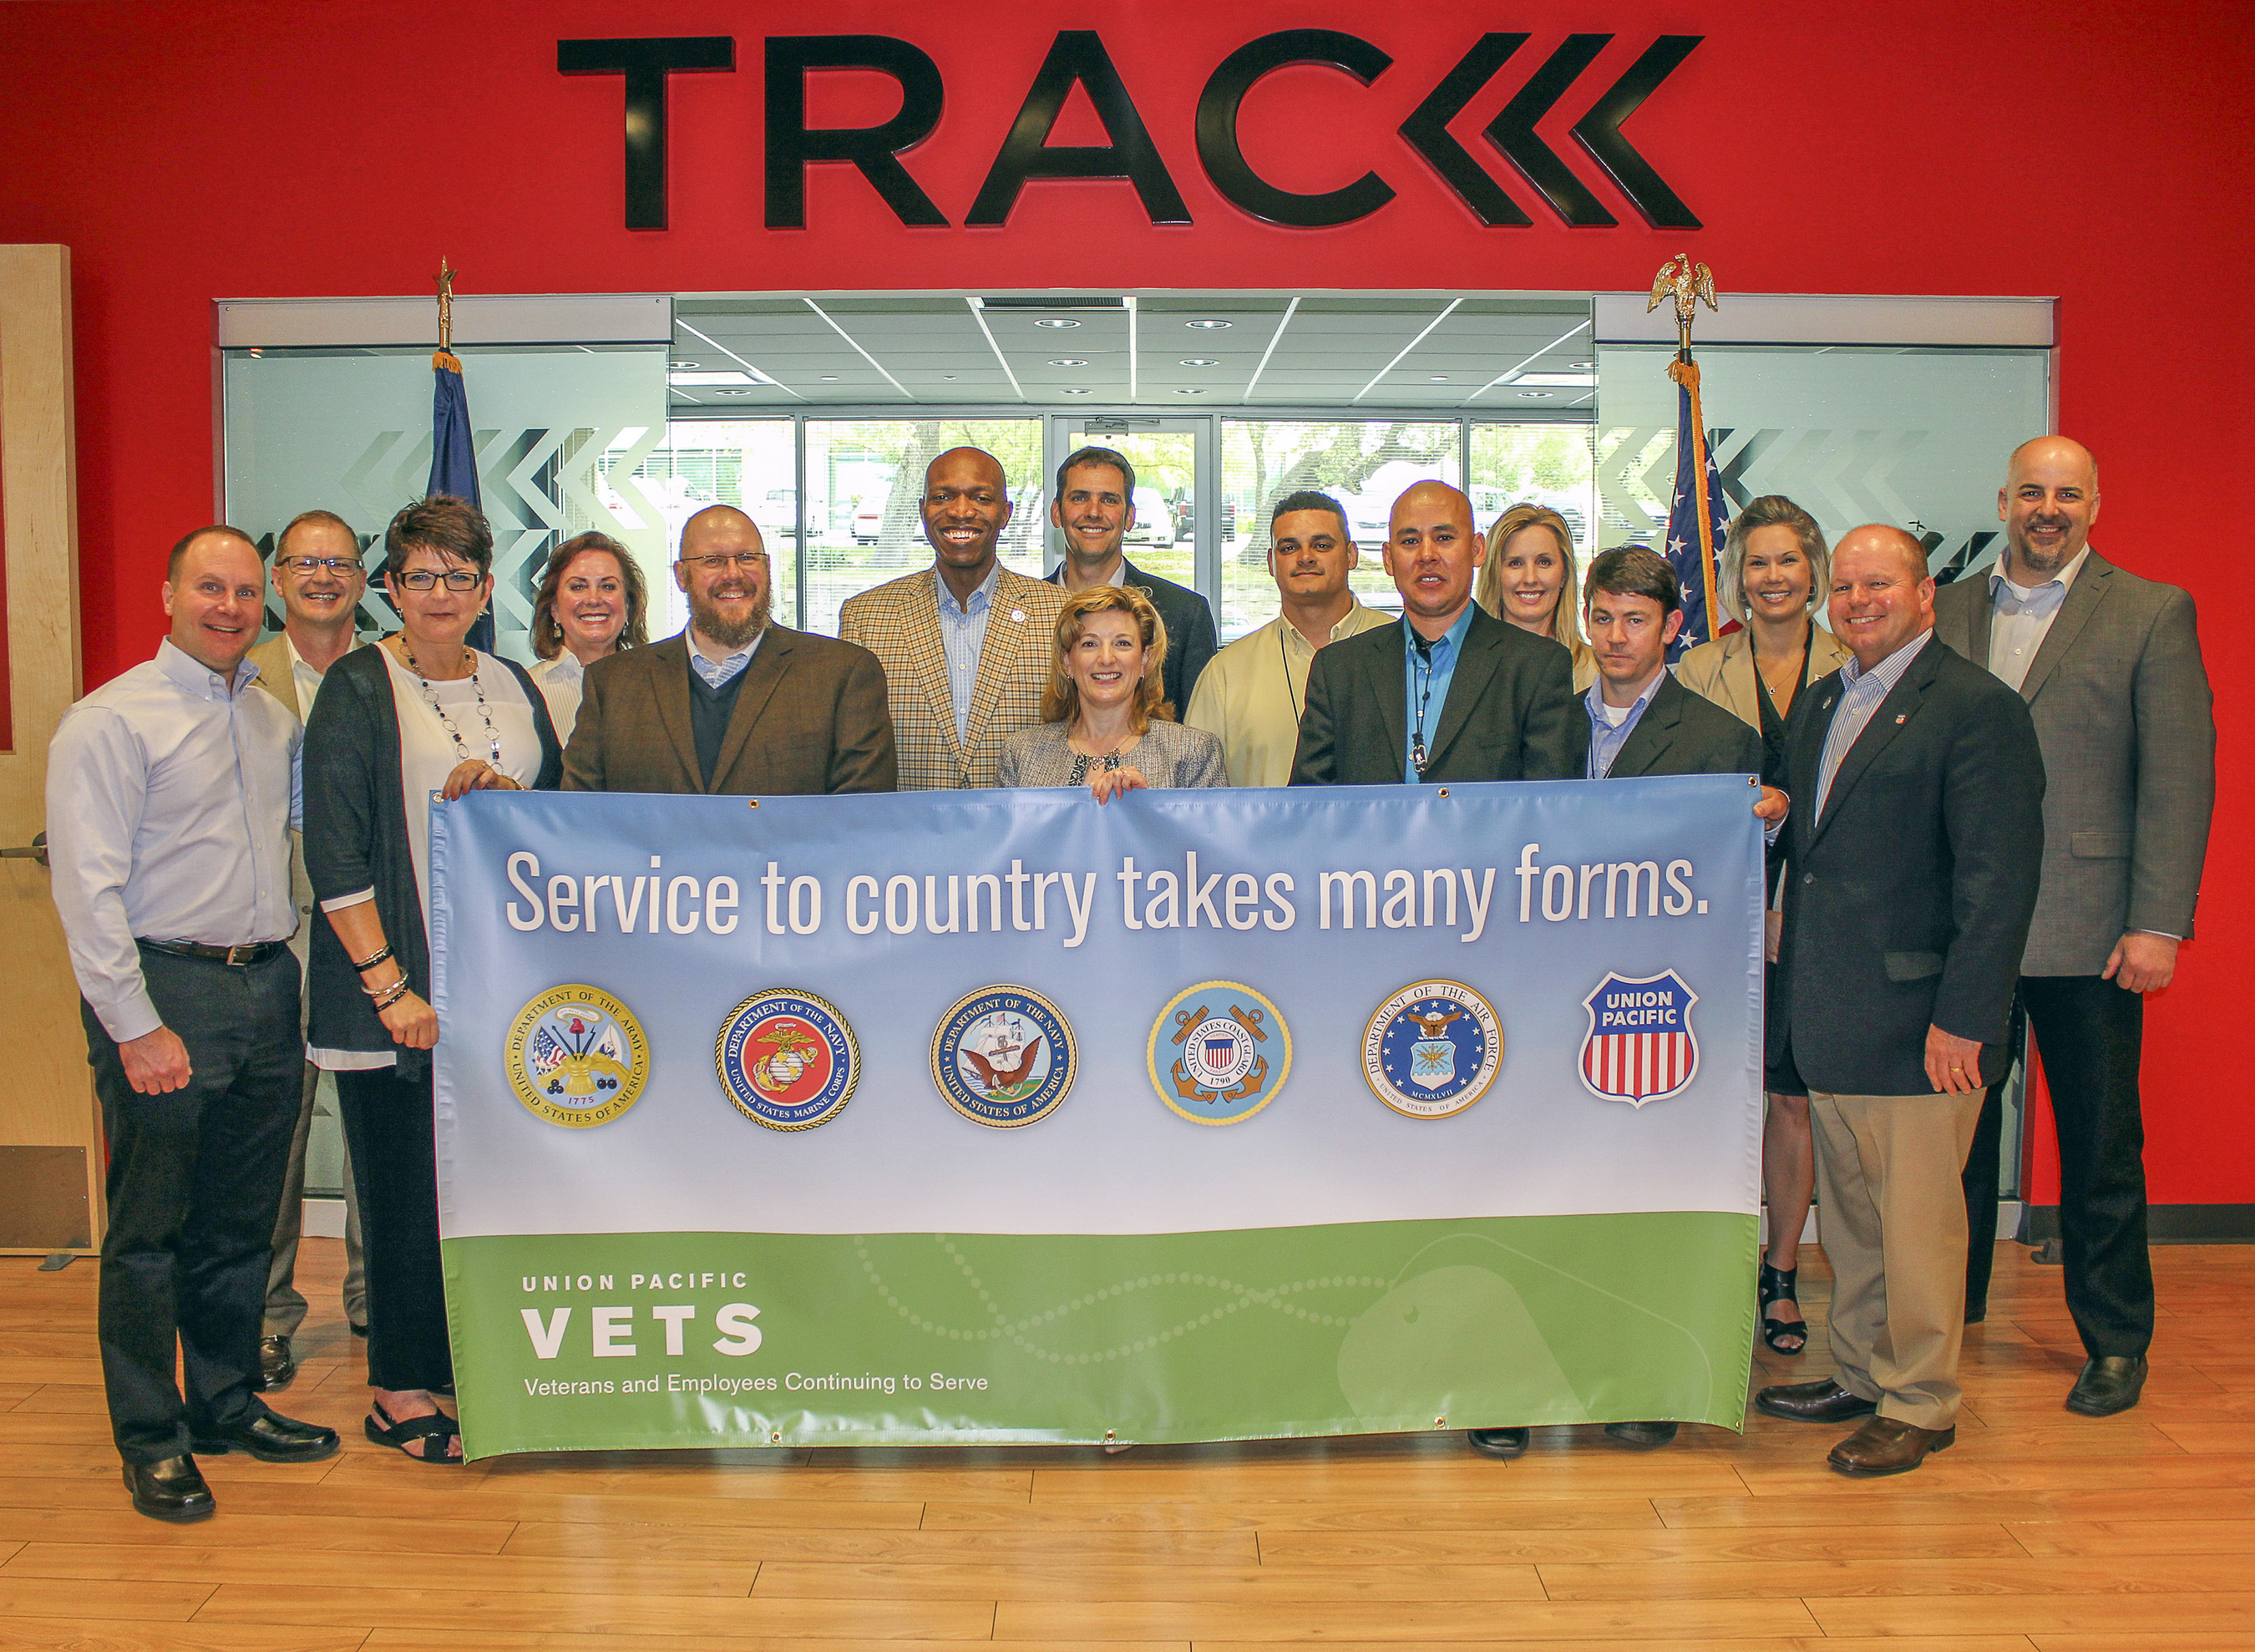 Union Pacific employees and military veterans present a $150,000 donation to Wounded Warrior Project (WWP) representatives at WWP's San Antonio TRACK facility, Monday, April 21, 2014. (PRNewsFoto/Union Pacific)